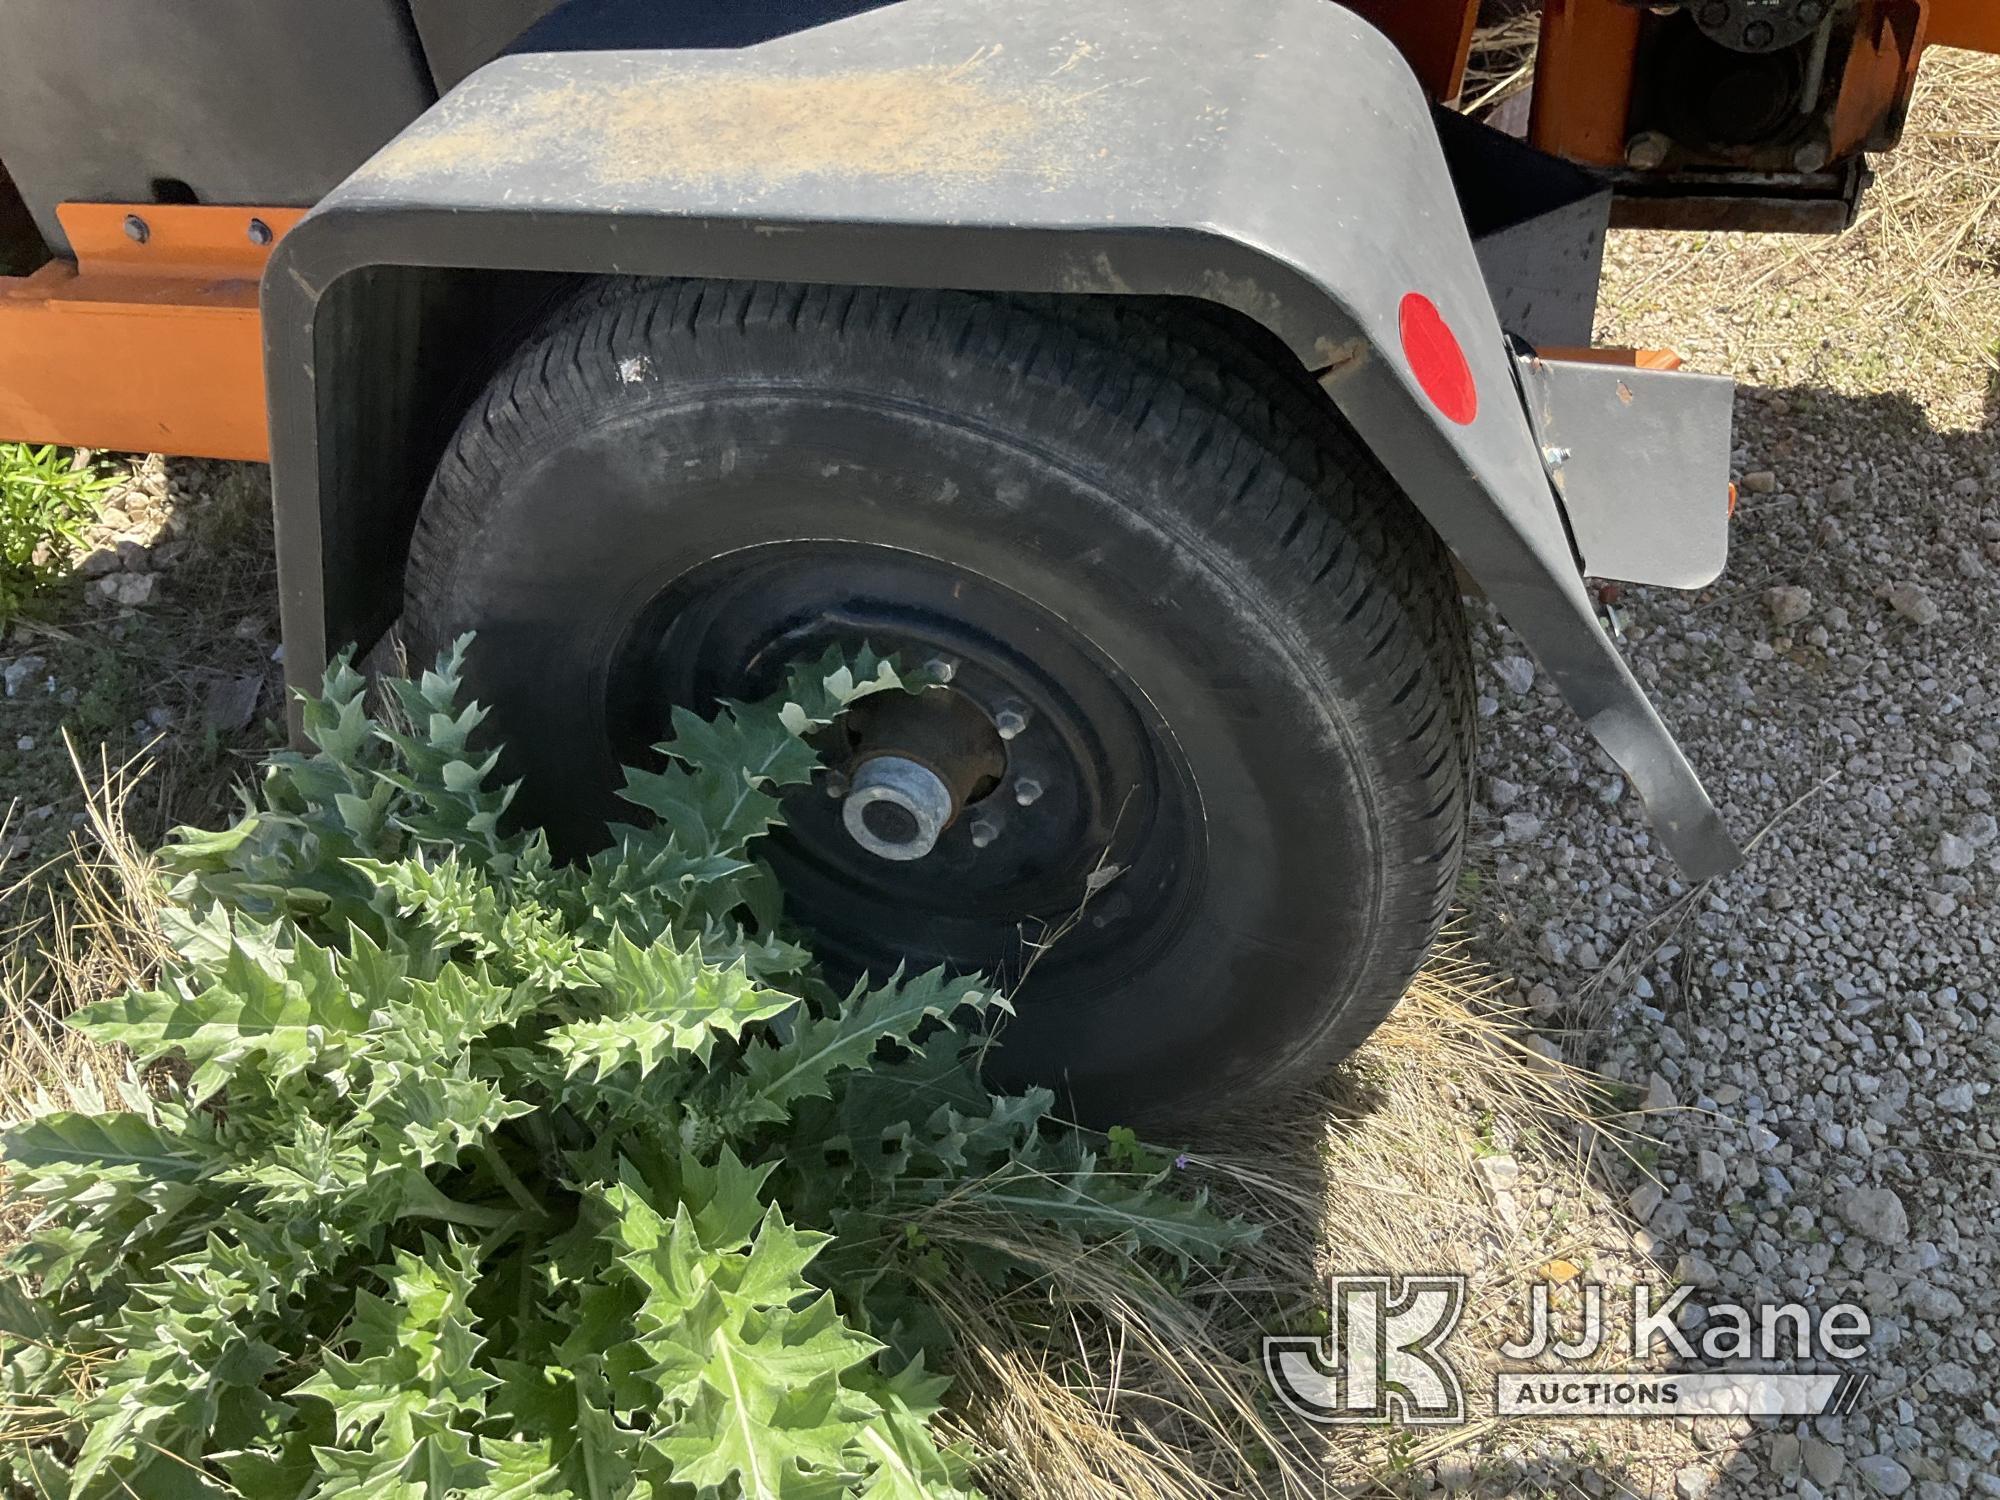 (Waxahachie, TX) 2015 Altec DC1317 Chipper (13in Disc) No Title) (Not Running, Condition Unknown